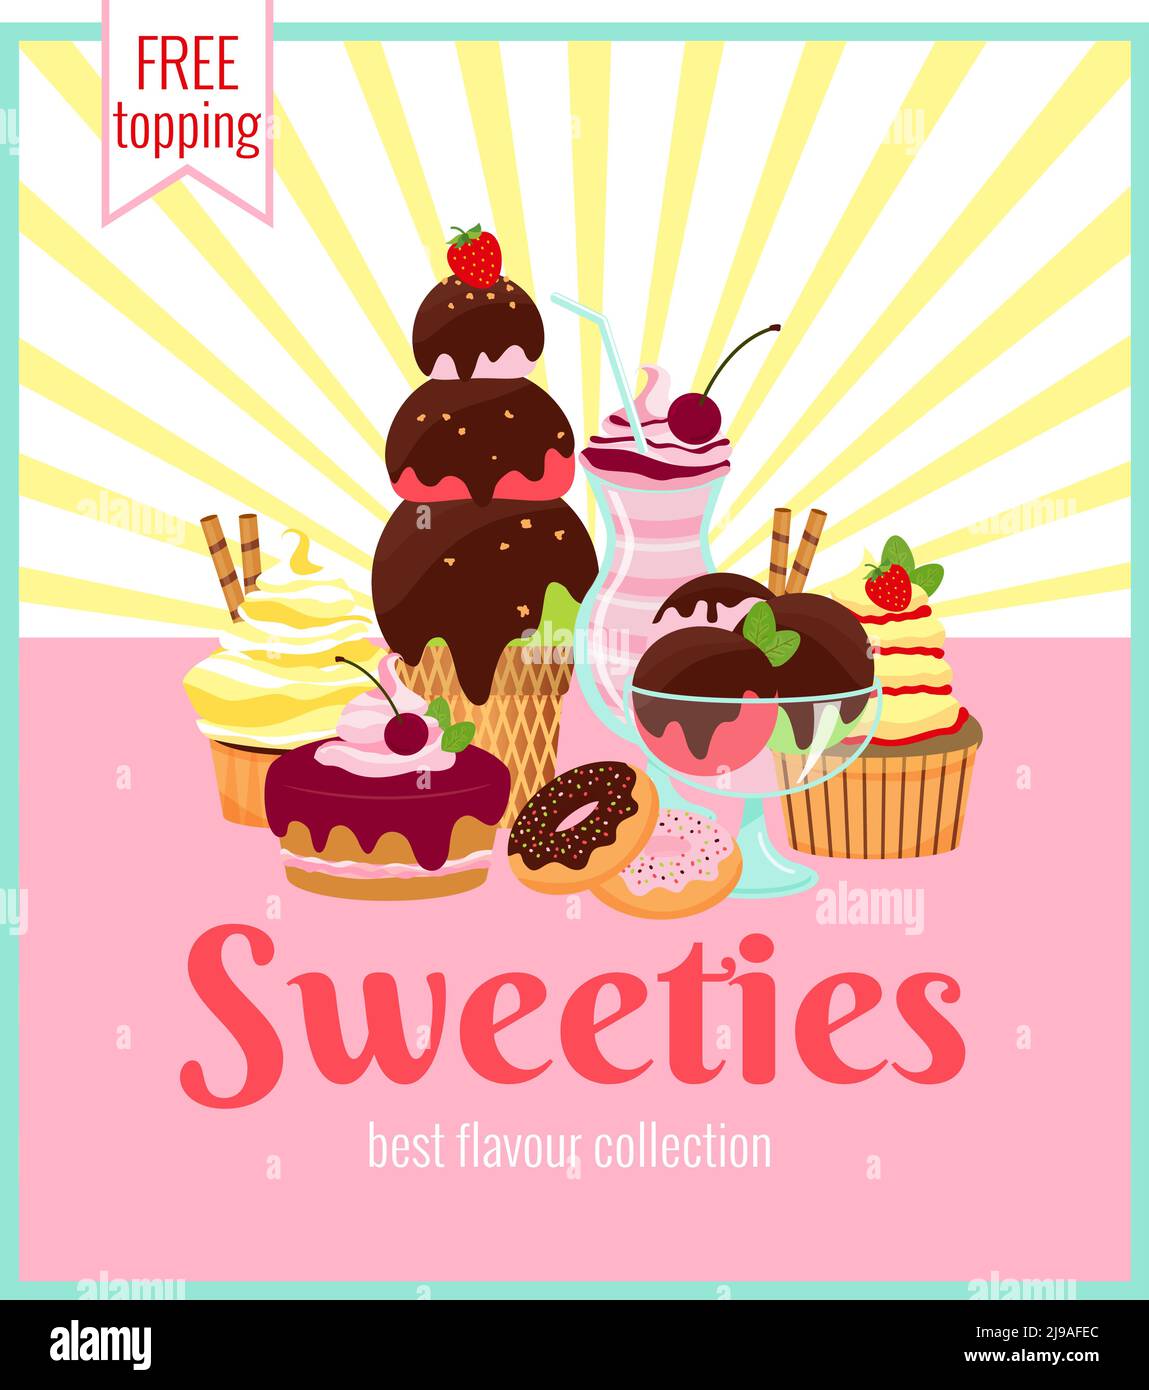 Sweeties retro poster design with a colorful array of ice cream  cakes  cookies  donuts  and cupcakes over a pink background with yellow rays and text Stock Vector